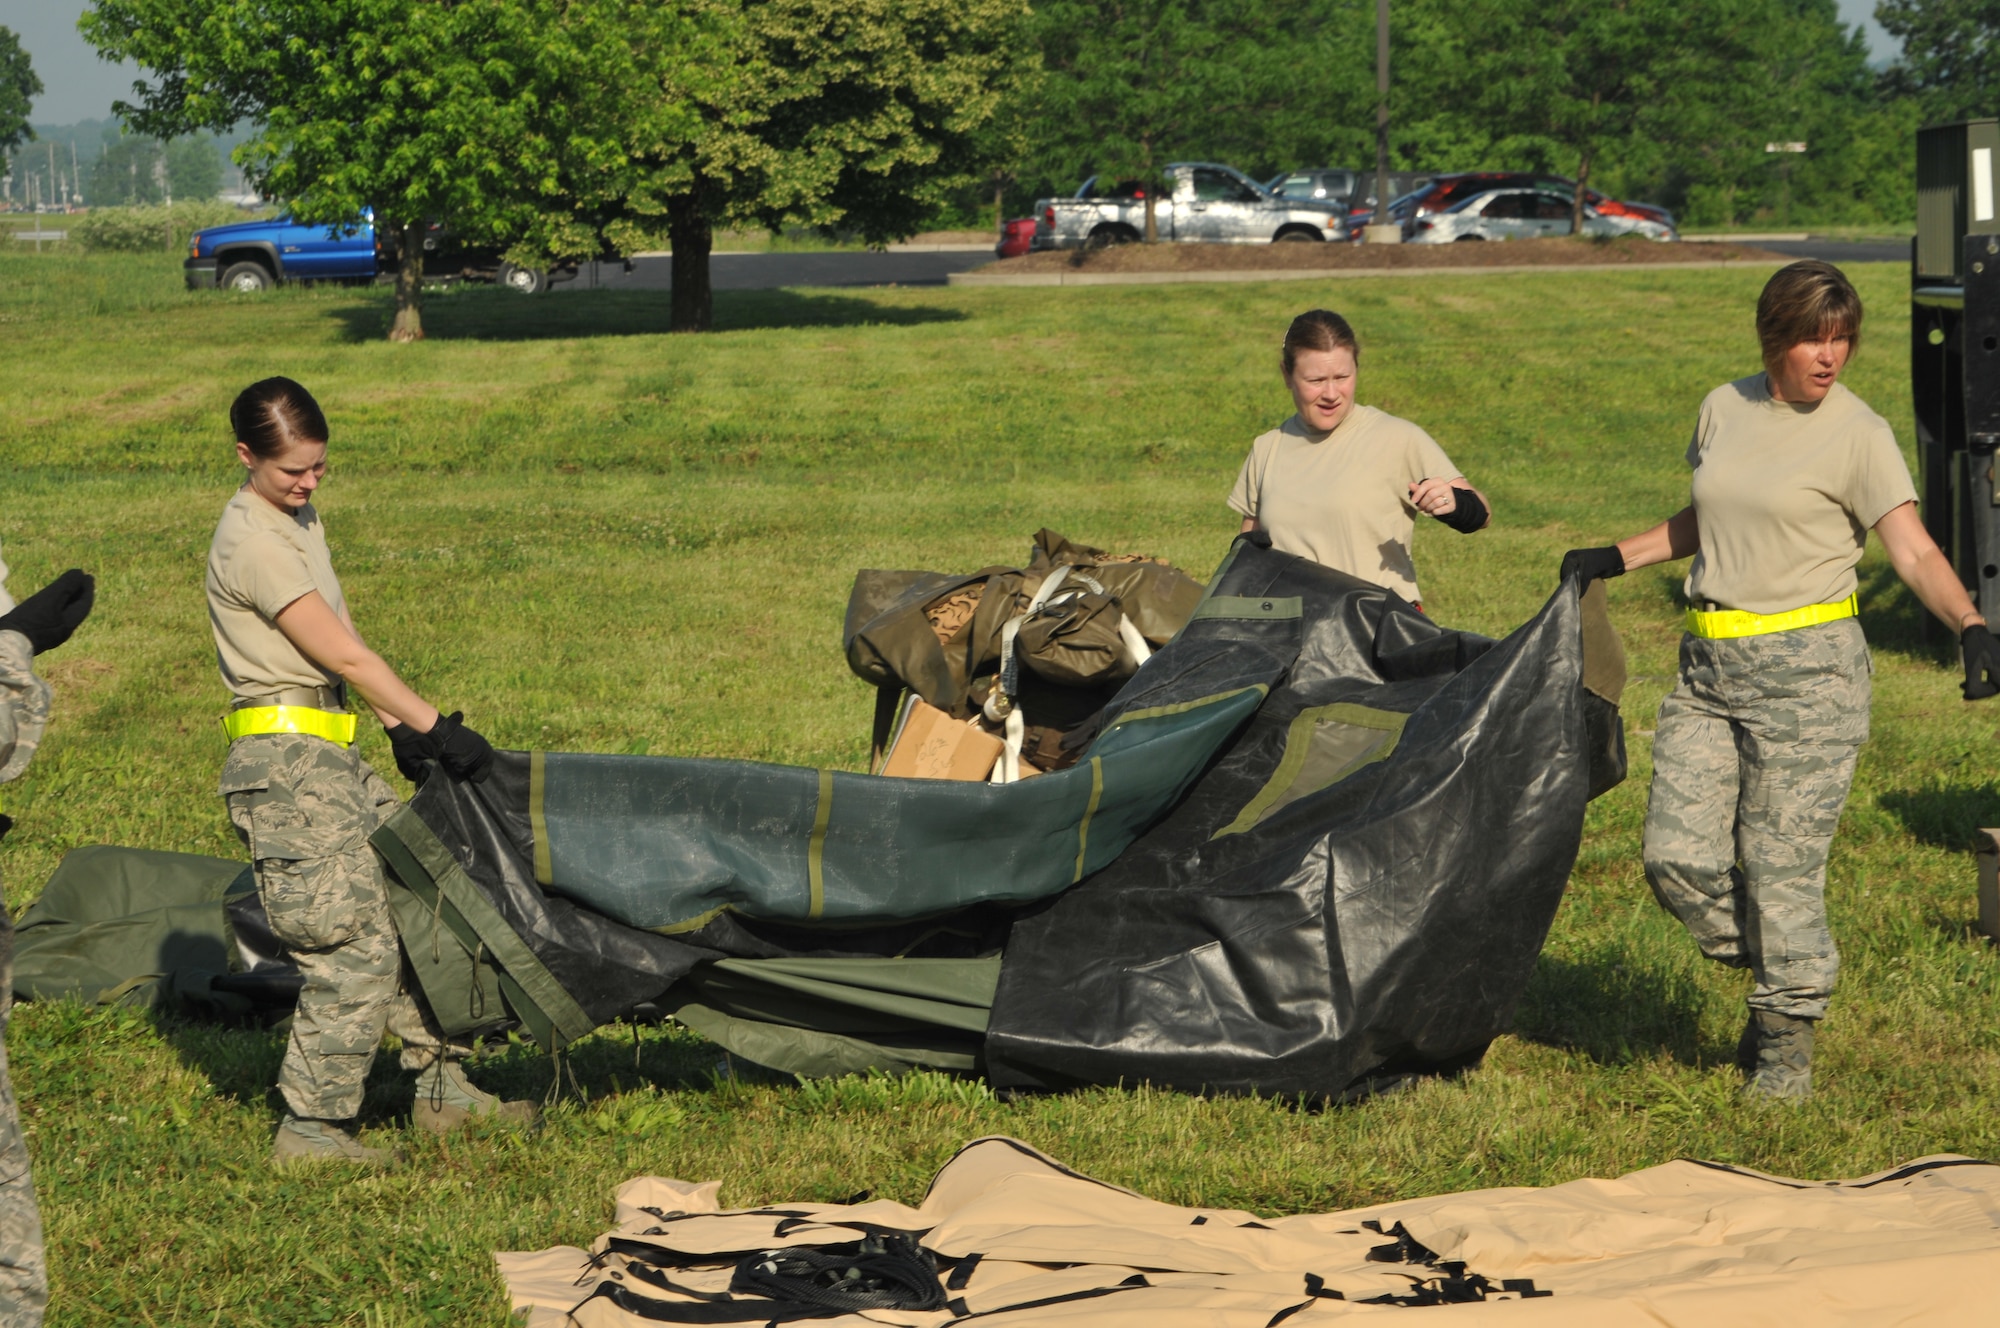 The 126th Force Support Squadron erect tents at the start of a three day bivouac exercise at Scott AFB, Ill. Units of the 126th Air Refueling Wing, Illinois Air National Guard, routinely practice deployment procedures to maintain their state of readiness. (U.S. Air Force photo by Tech Sgt. Johnathon Orrell)